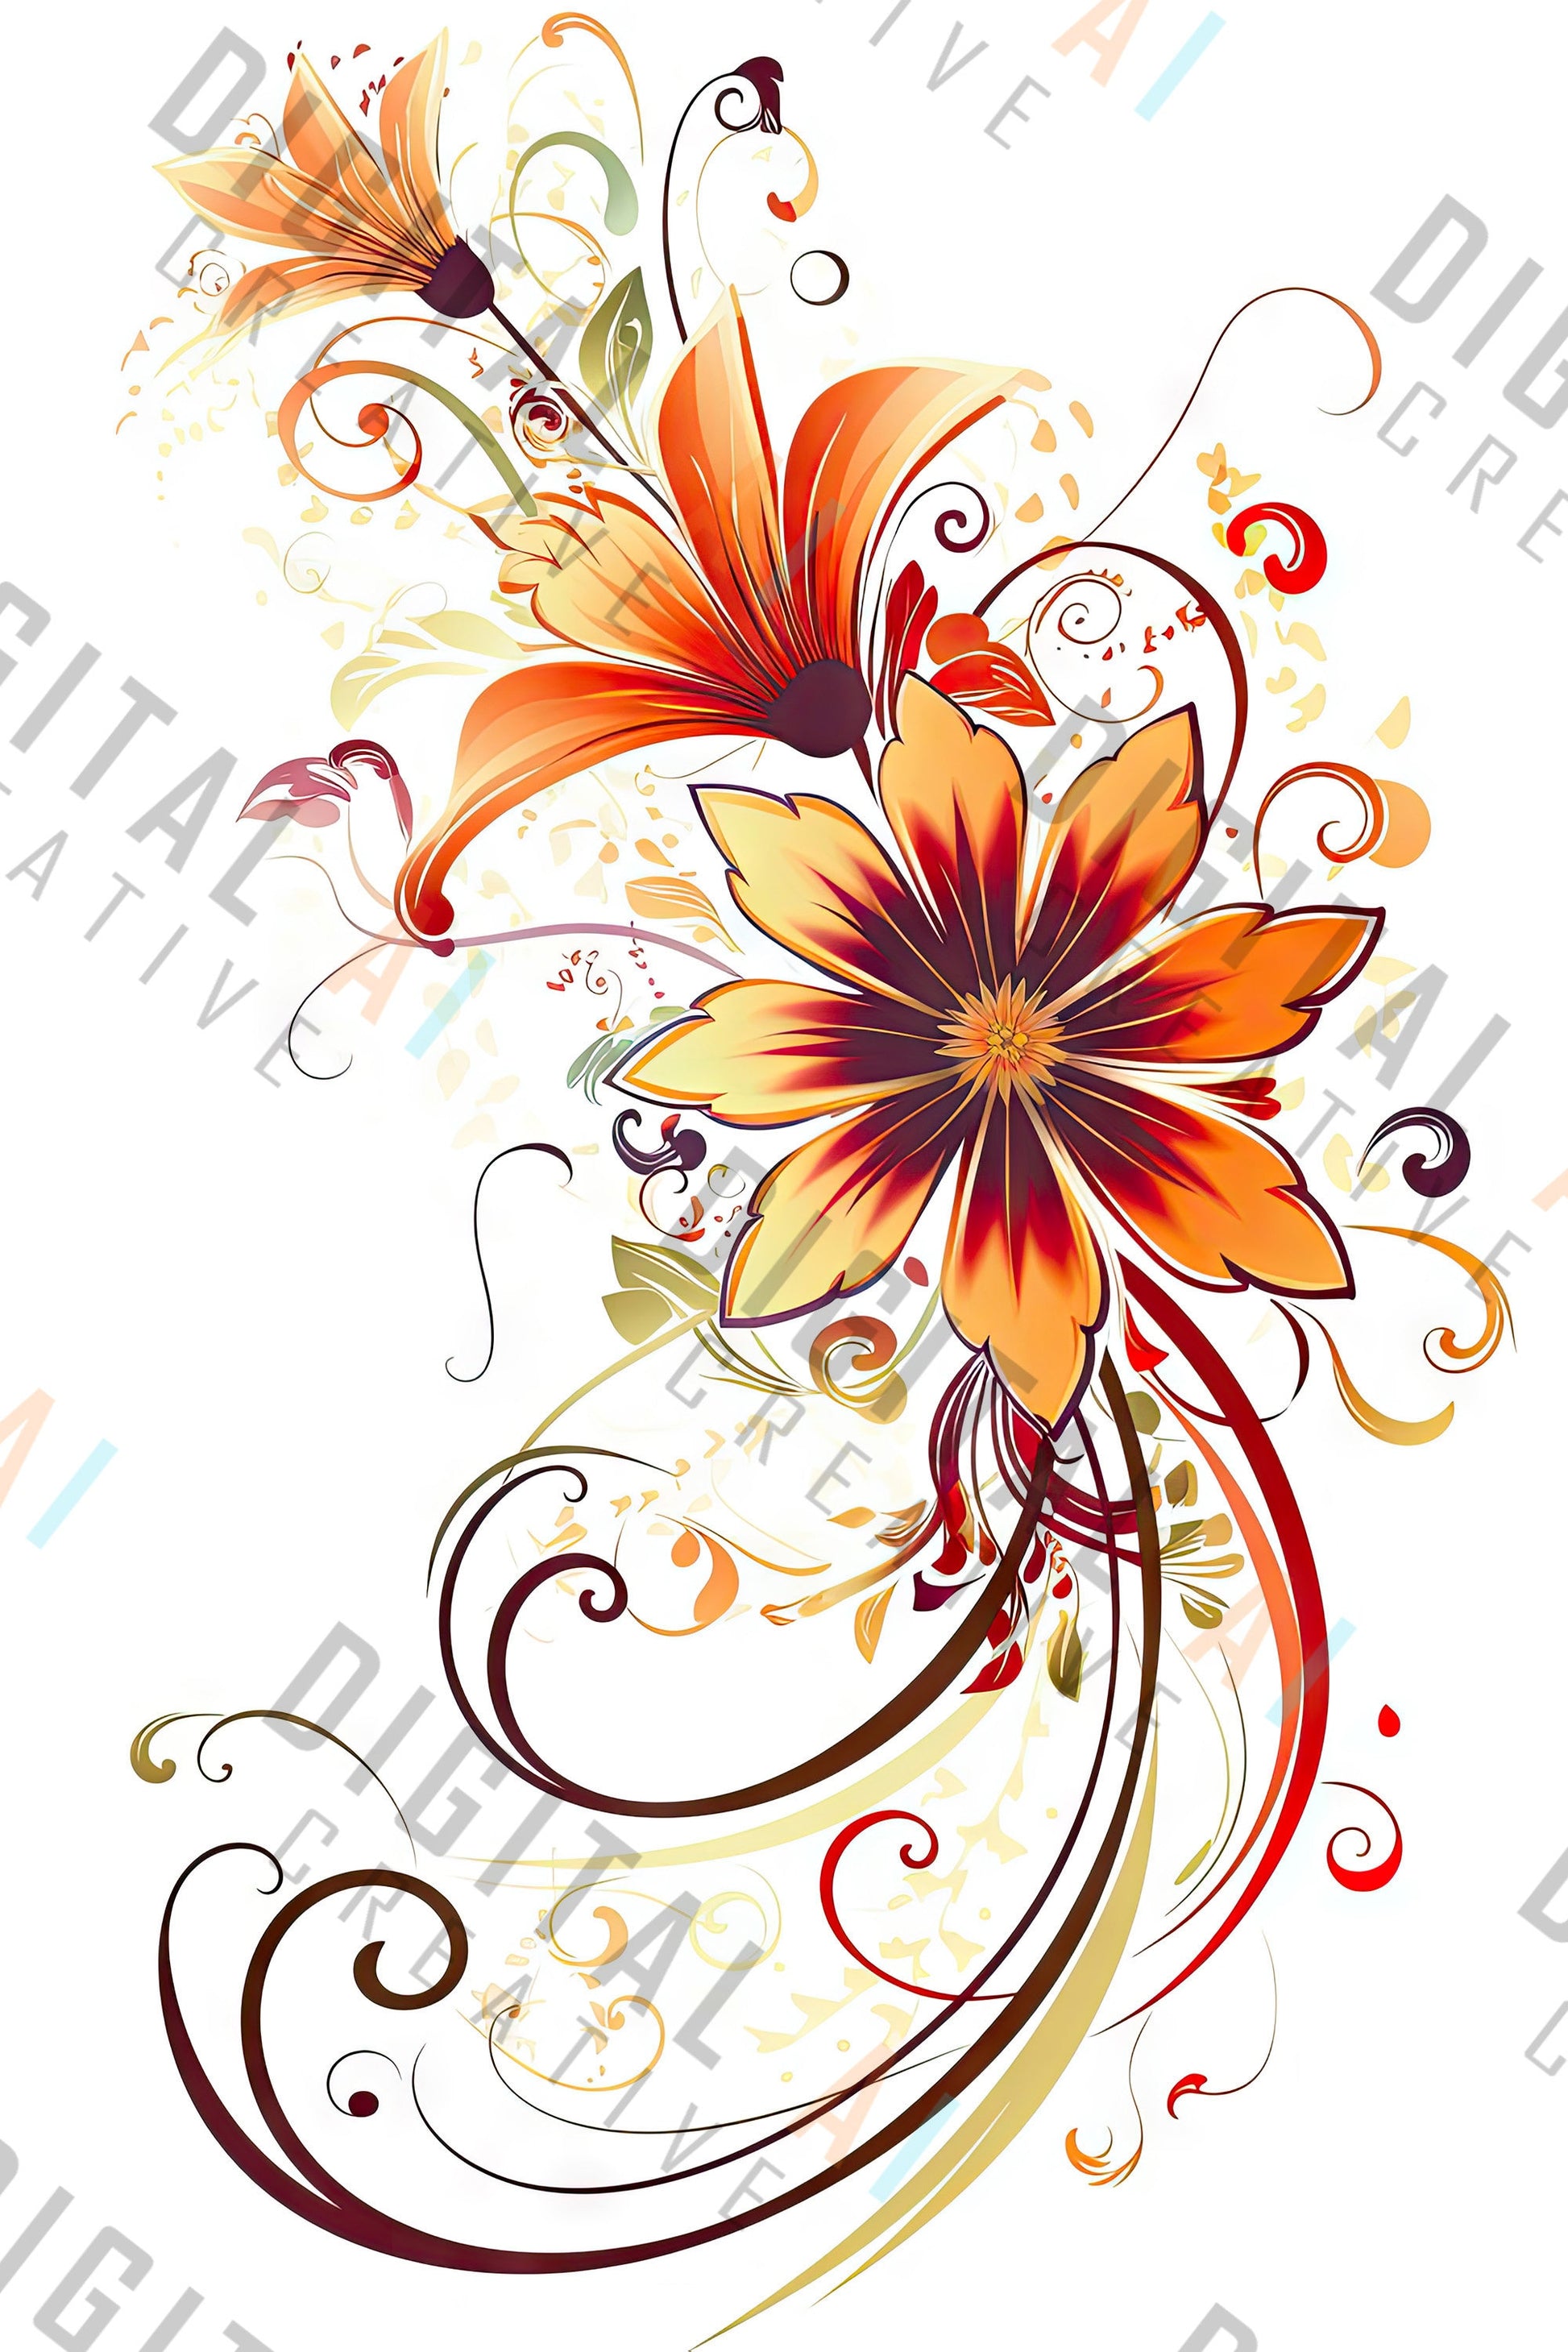 Digital Illustration Package - X8 Flower Garden - A Colorful Collection of Flower Designs Vol 3 - 5376 x 8064 @300DPI